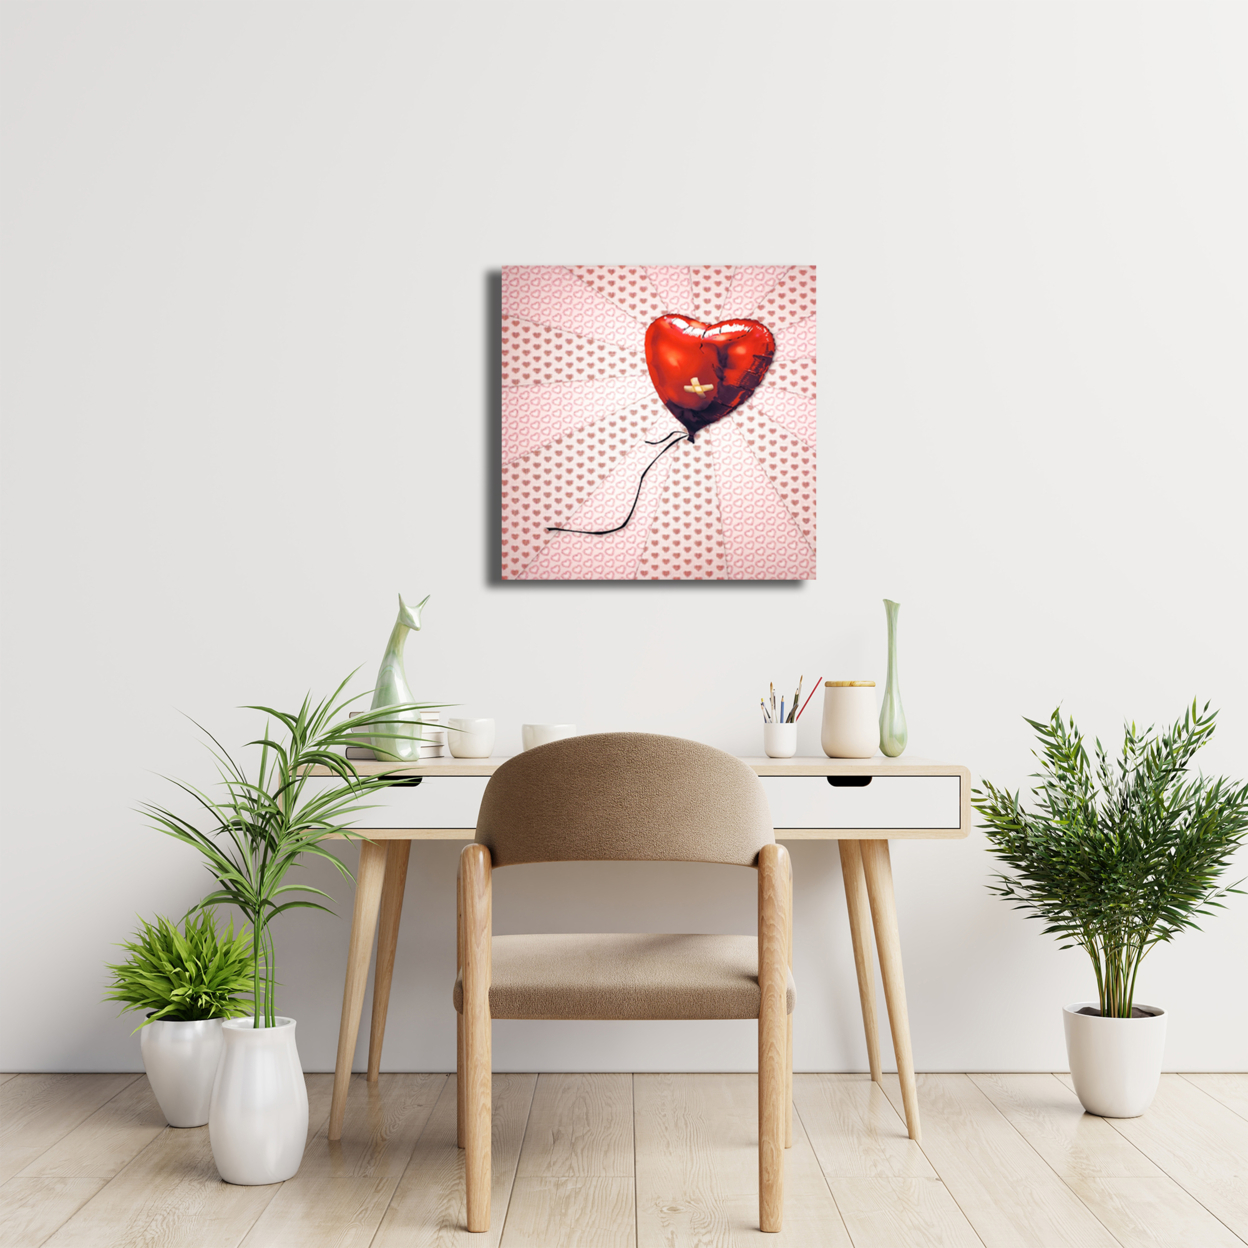 5D Multi-Dimensional Wall Art - Custom Made Balloon Heart Wall Art Print On Strong Polycarbonate Panel W/ Vibrant Colors By Matashi (6x6 In)